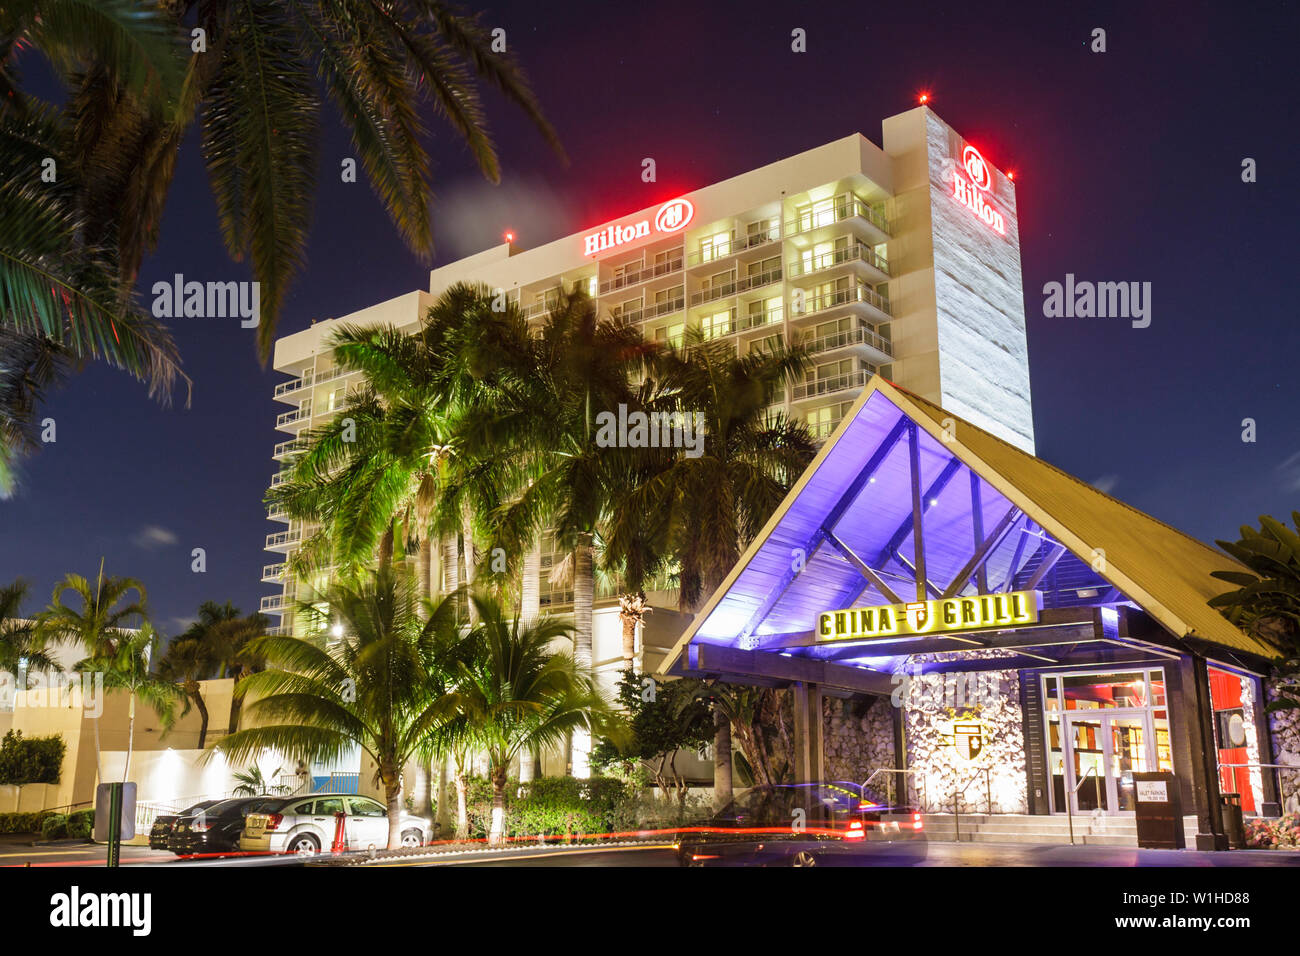 Fort Ft. Lauderdale Florida,Hilton Fort Lauderdale Marina,hotel,luxury,China Grill,restaurant restaurants food dining cafe cafes,service,cuisine,Asian Stock Photo